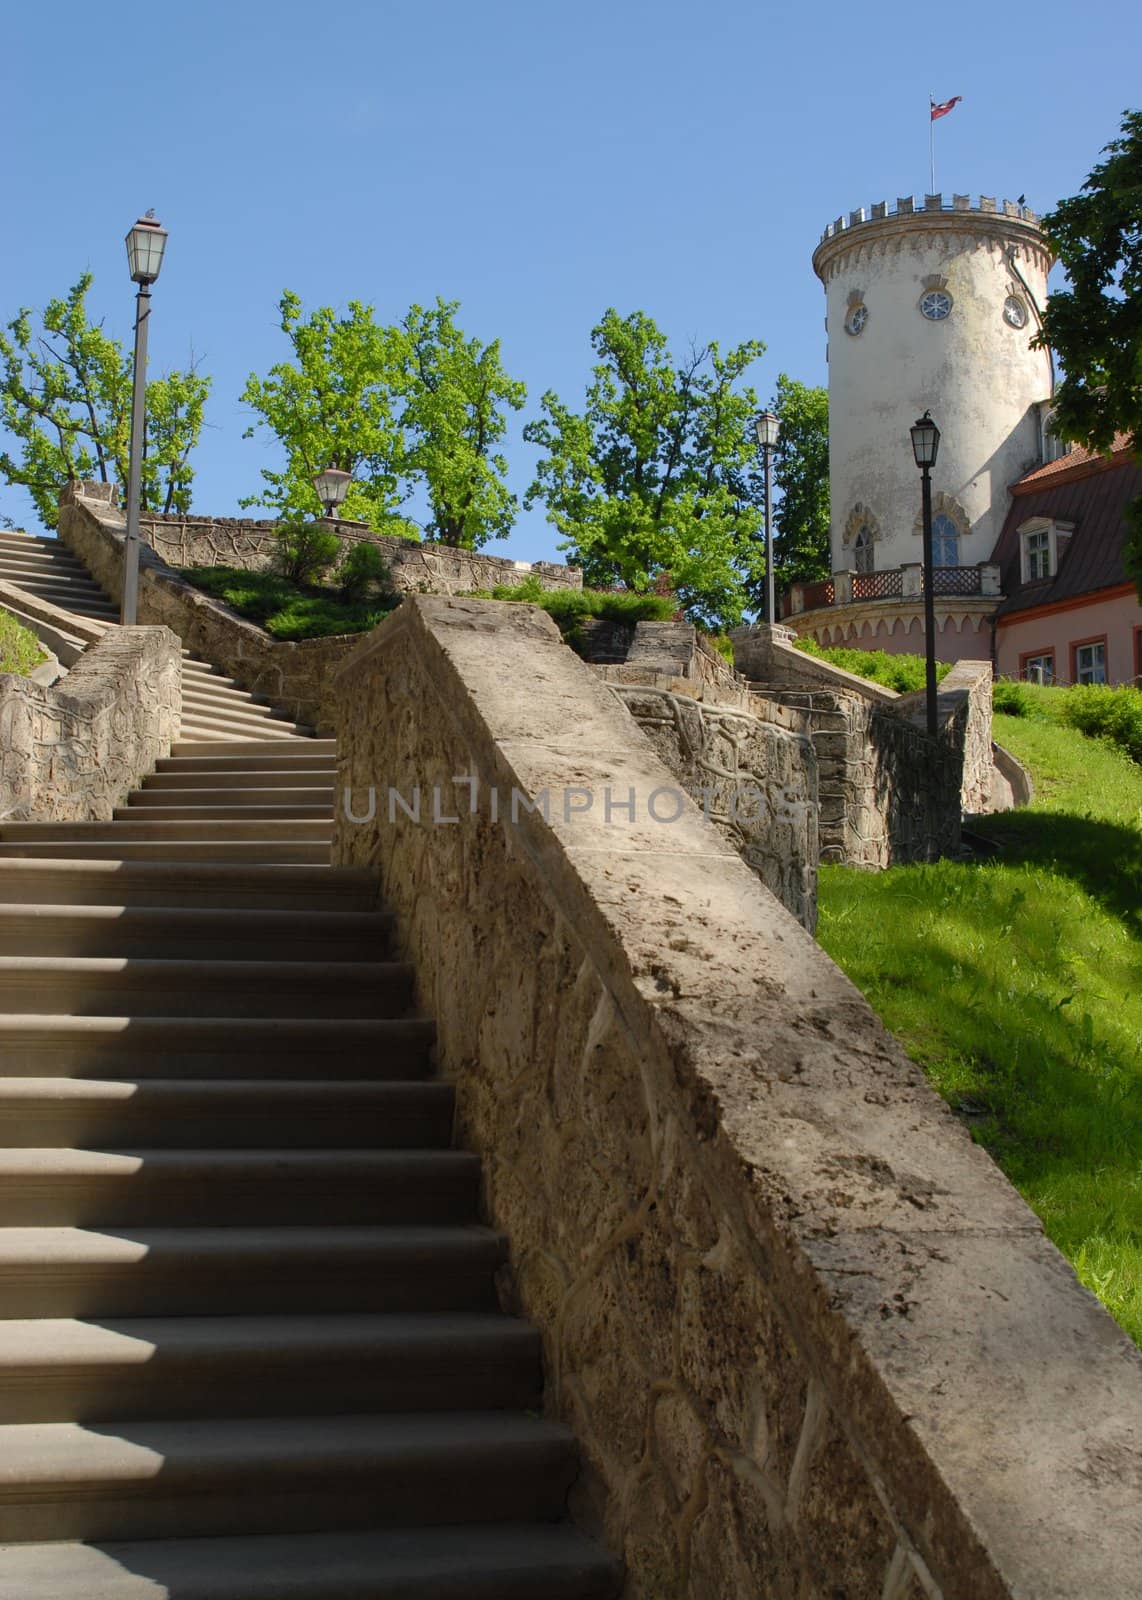 Stone stairs up to tower by photohaydar